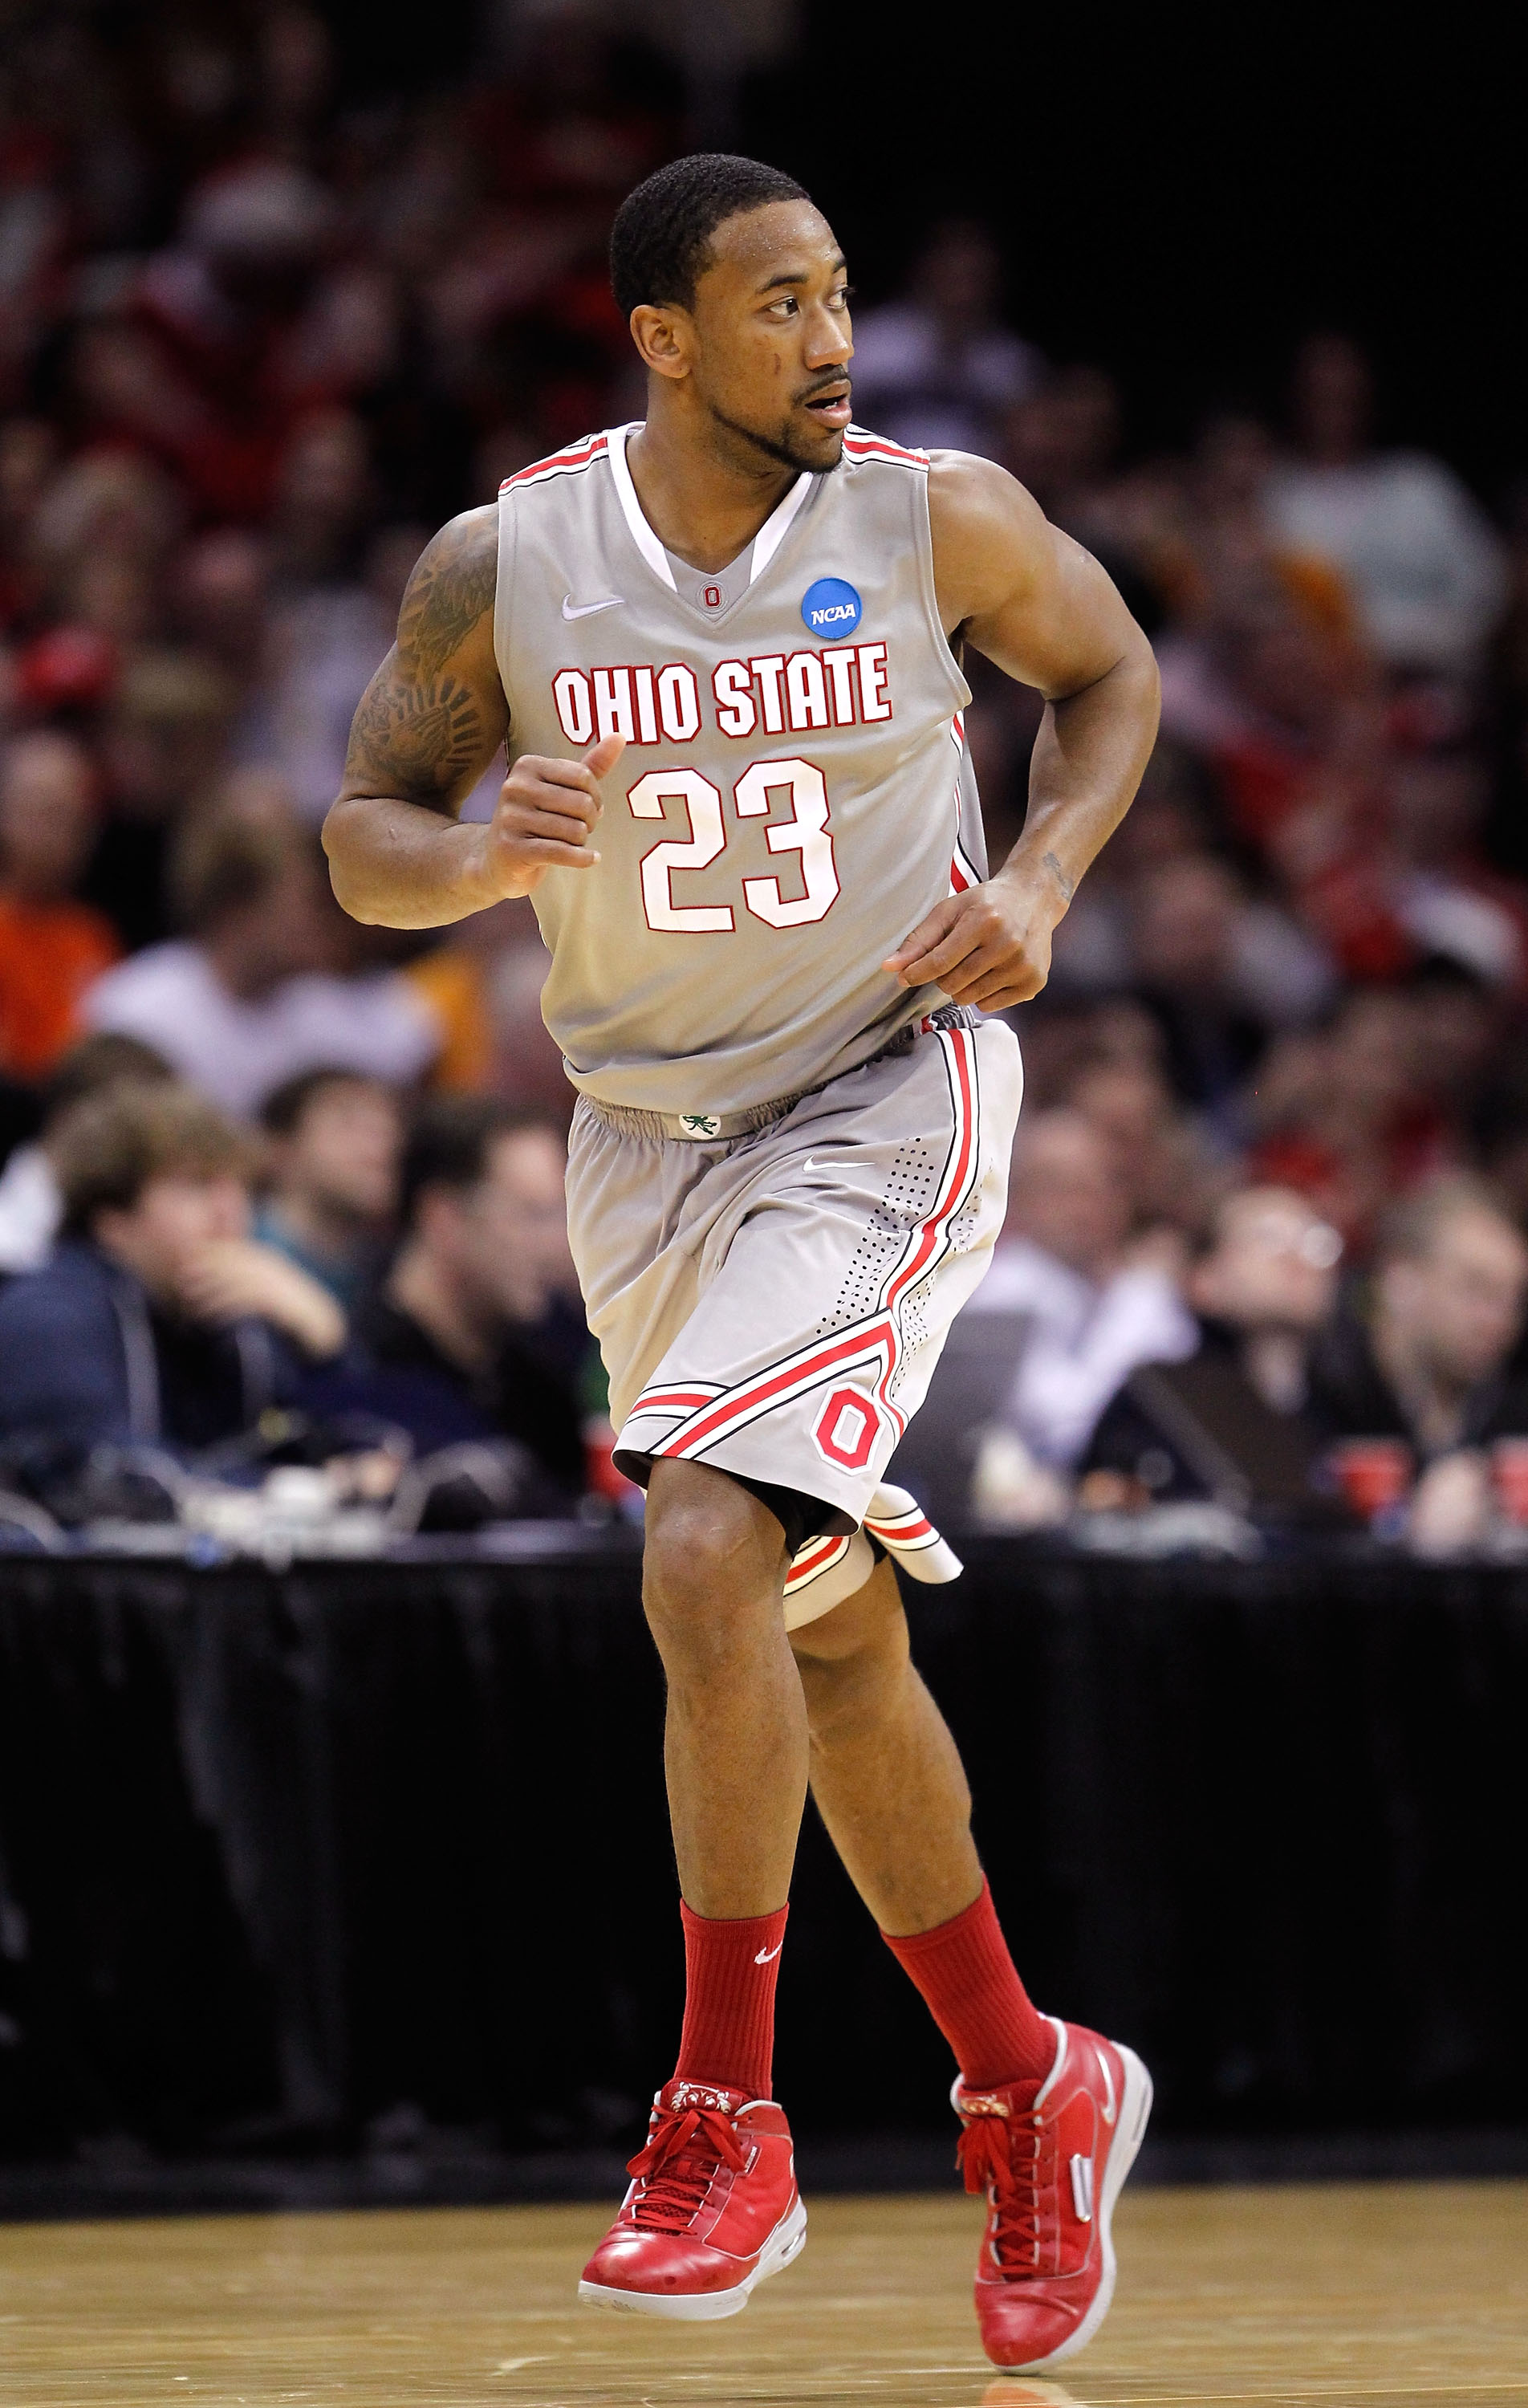 CLEVELAND, OH - MARCH 20: David Lighty #23 of the Ohio State Buckeyes runs up court after a play against the George Mason Patriots during the third of the 2011 NCAA men's basketball tournament at Quicken Loans Arena on March 20, 2011 in Cleveland, Ohio.